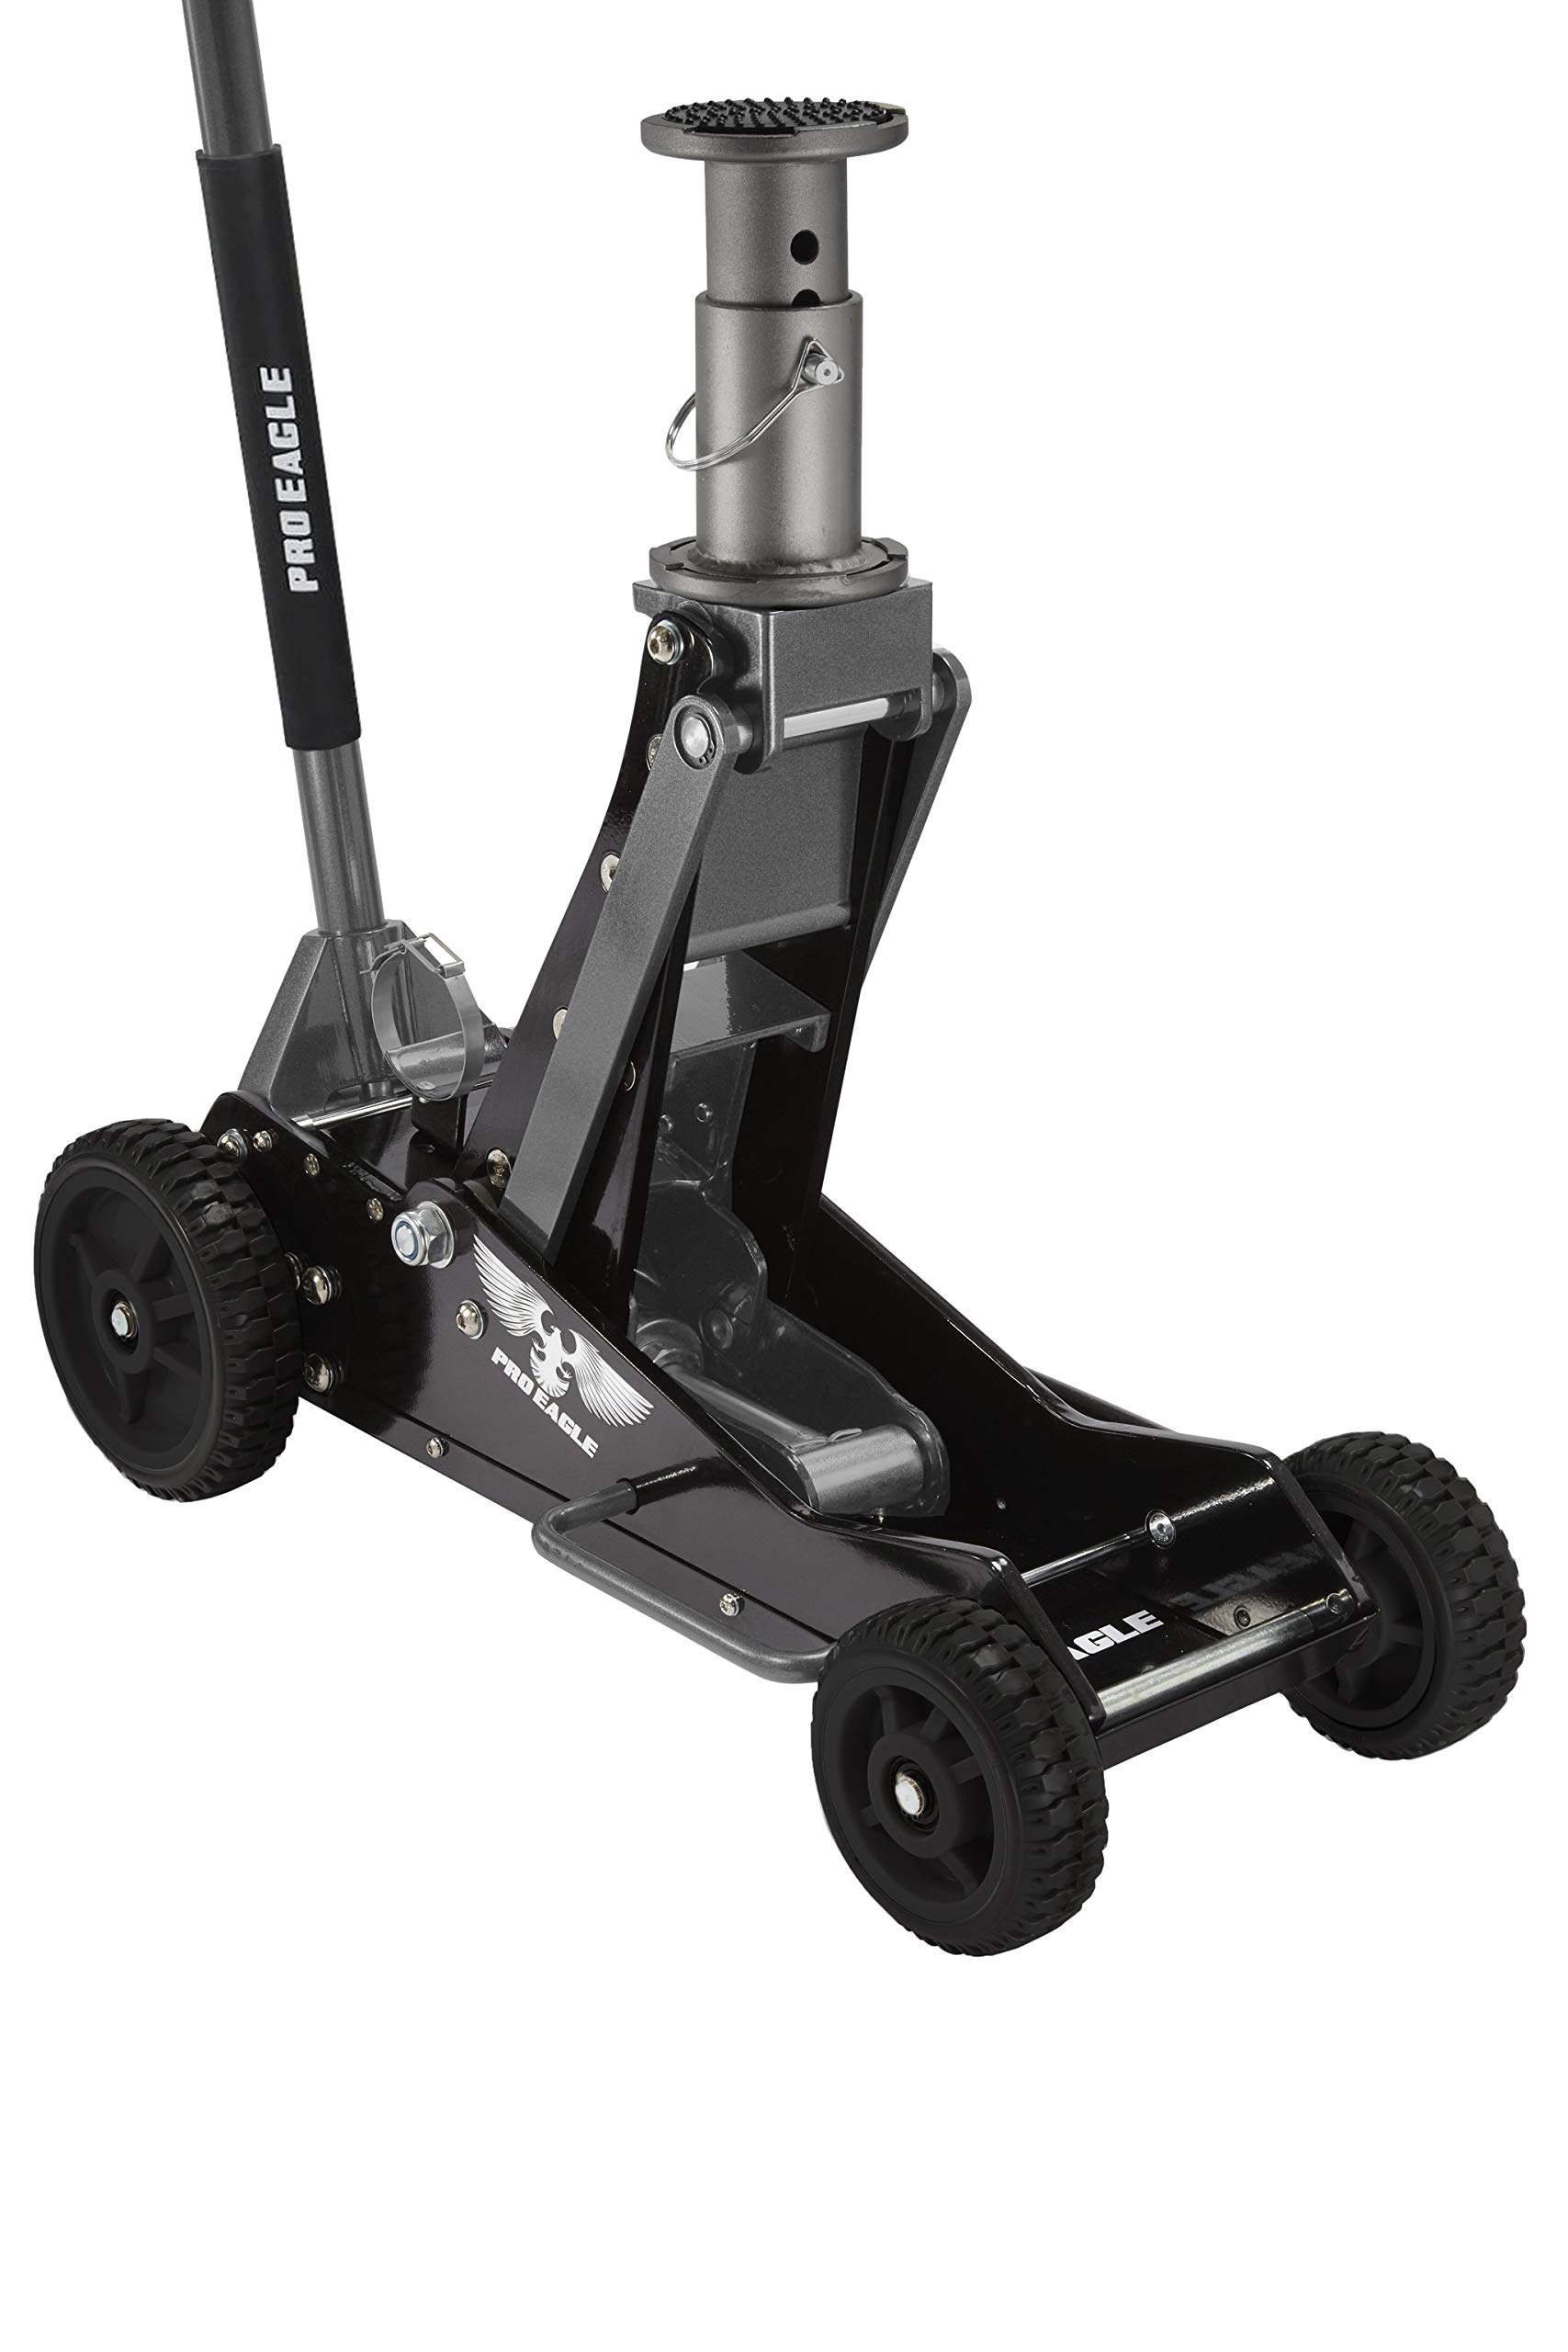 Pro Eagle 3 Ton Big Wheel Hydraulic Off Road Jack, for Lifted, 4WD, and Truck, Pickup, Heavy Duty,Extreme Vehicles